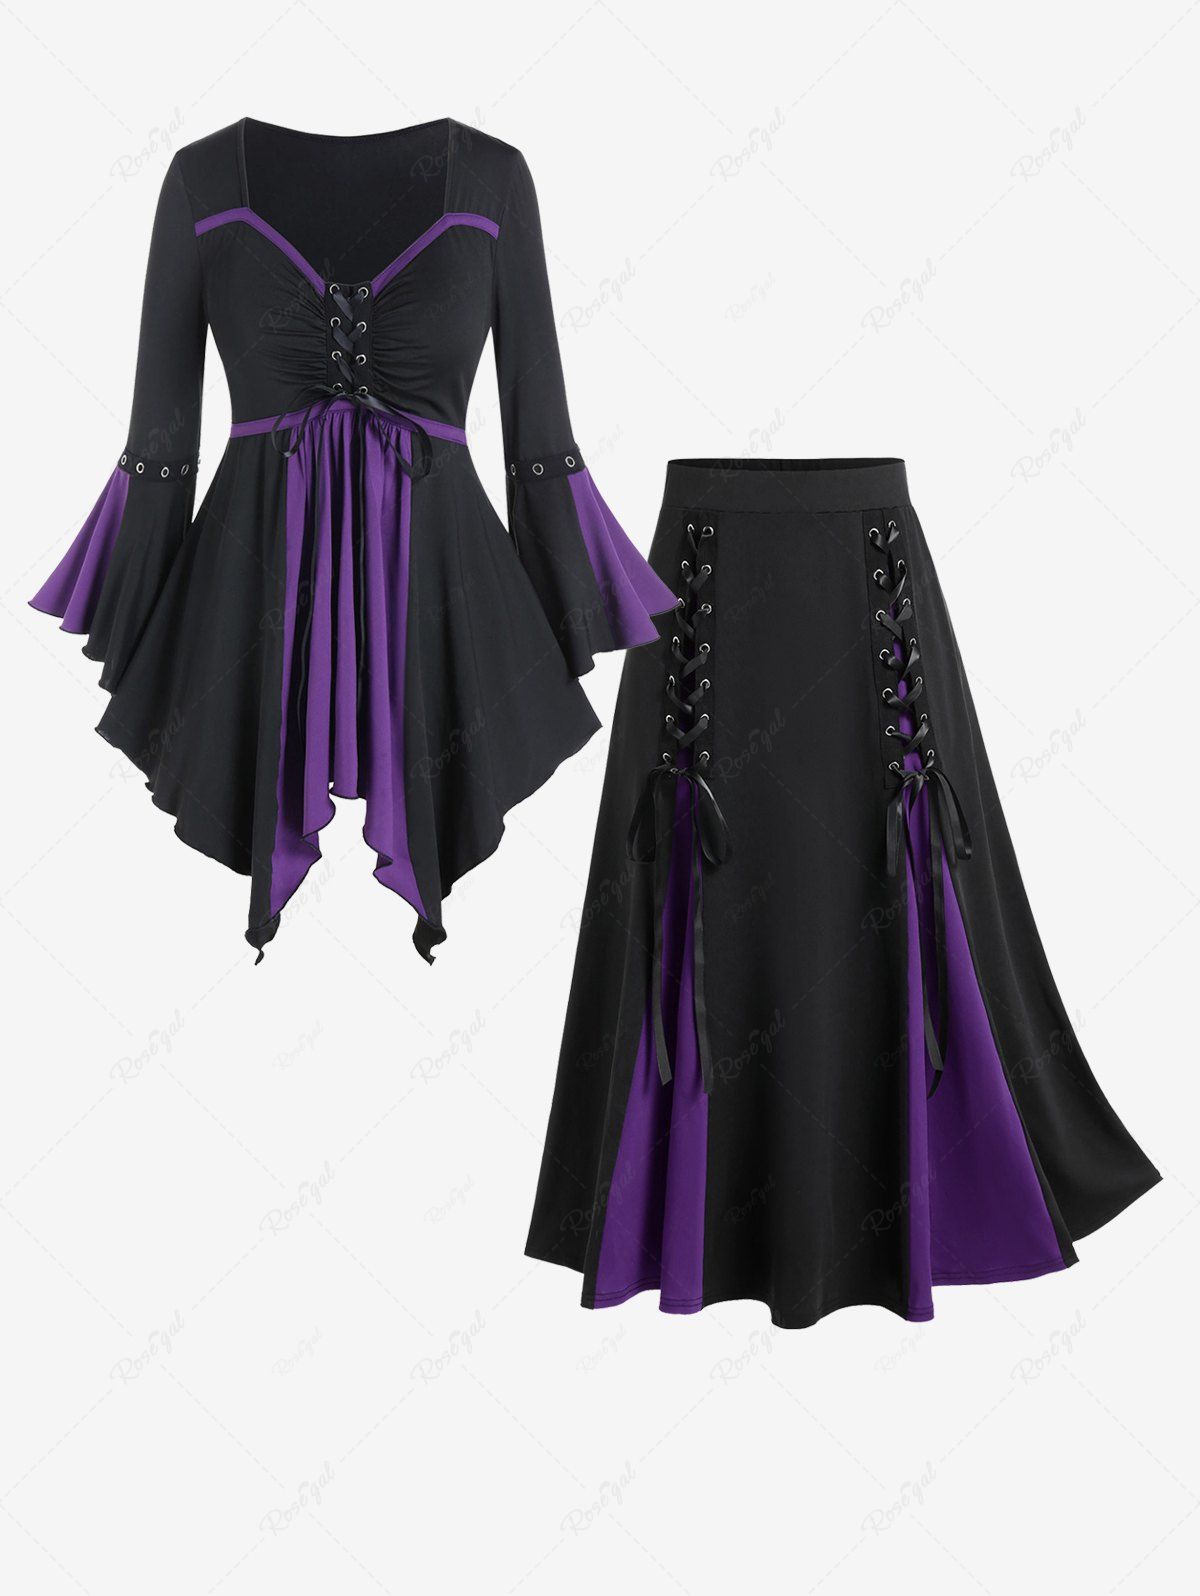 New Gothic Flare Sleeves Lace Up Two Tone Handkerchief Tee and Godet Midi A Line Skirt Outfit  